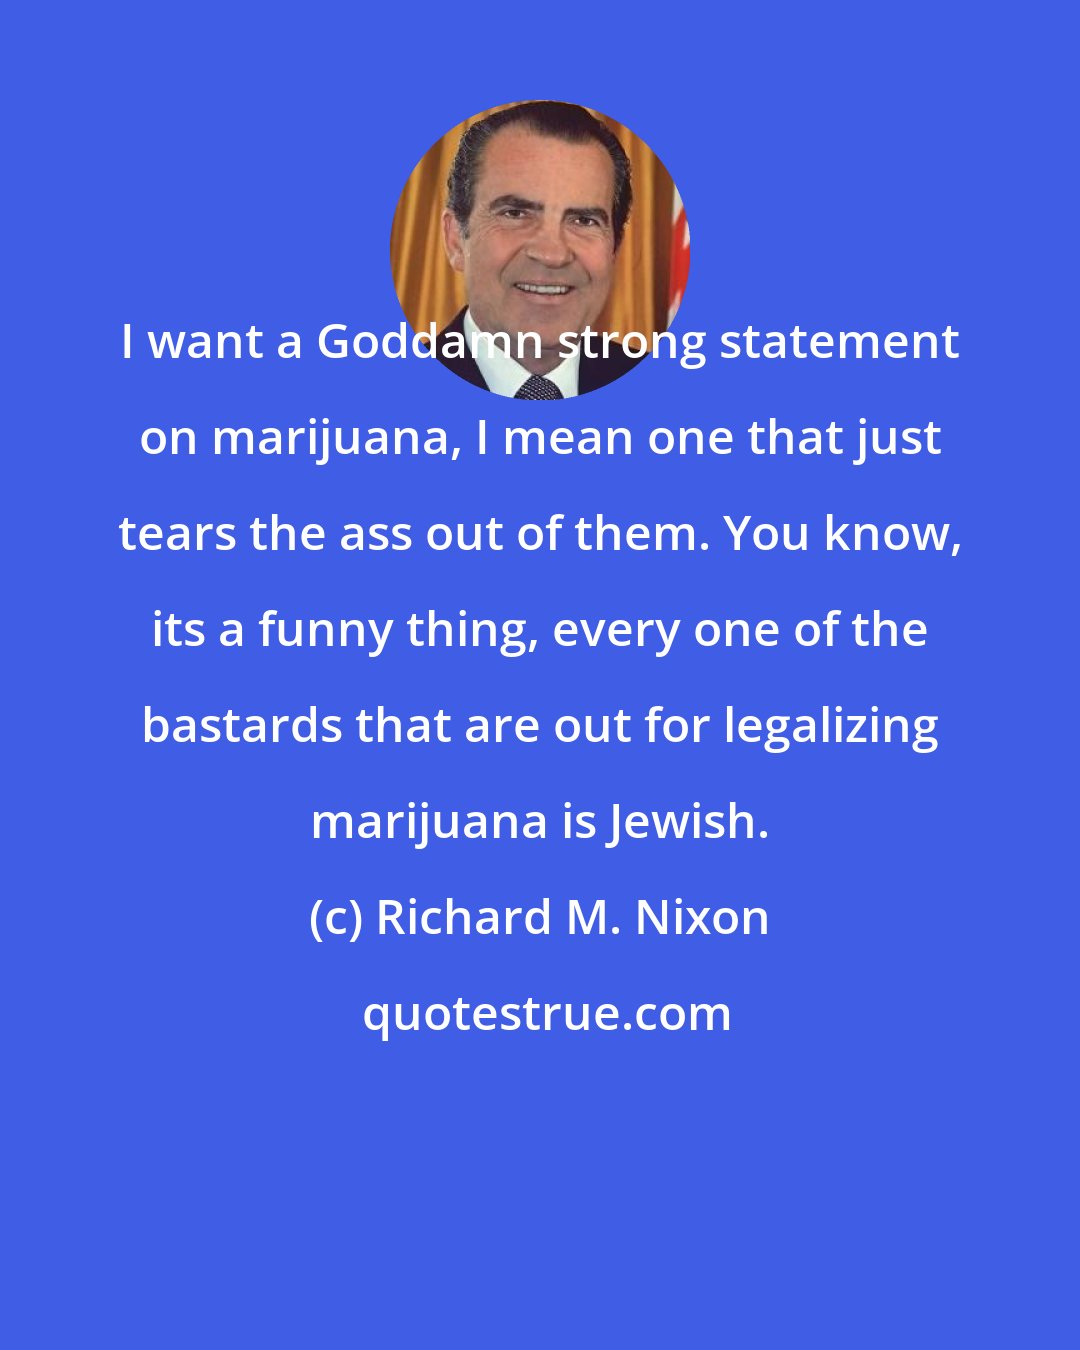 Richard M. Nixon: I want a Goddamn strong statement on marijuana, I mean one that just tears the ass out of them. You know, its a funny thing, every one of the bastards that are out for legalizing marijuana is Jewish.